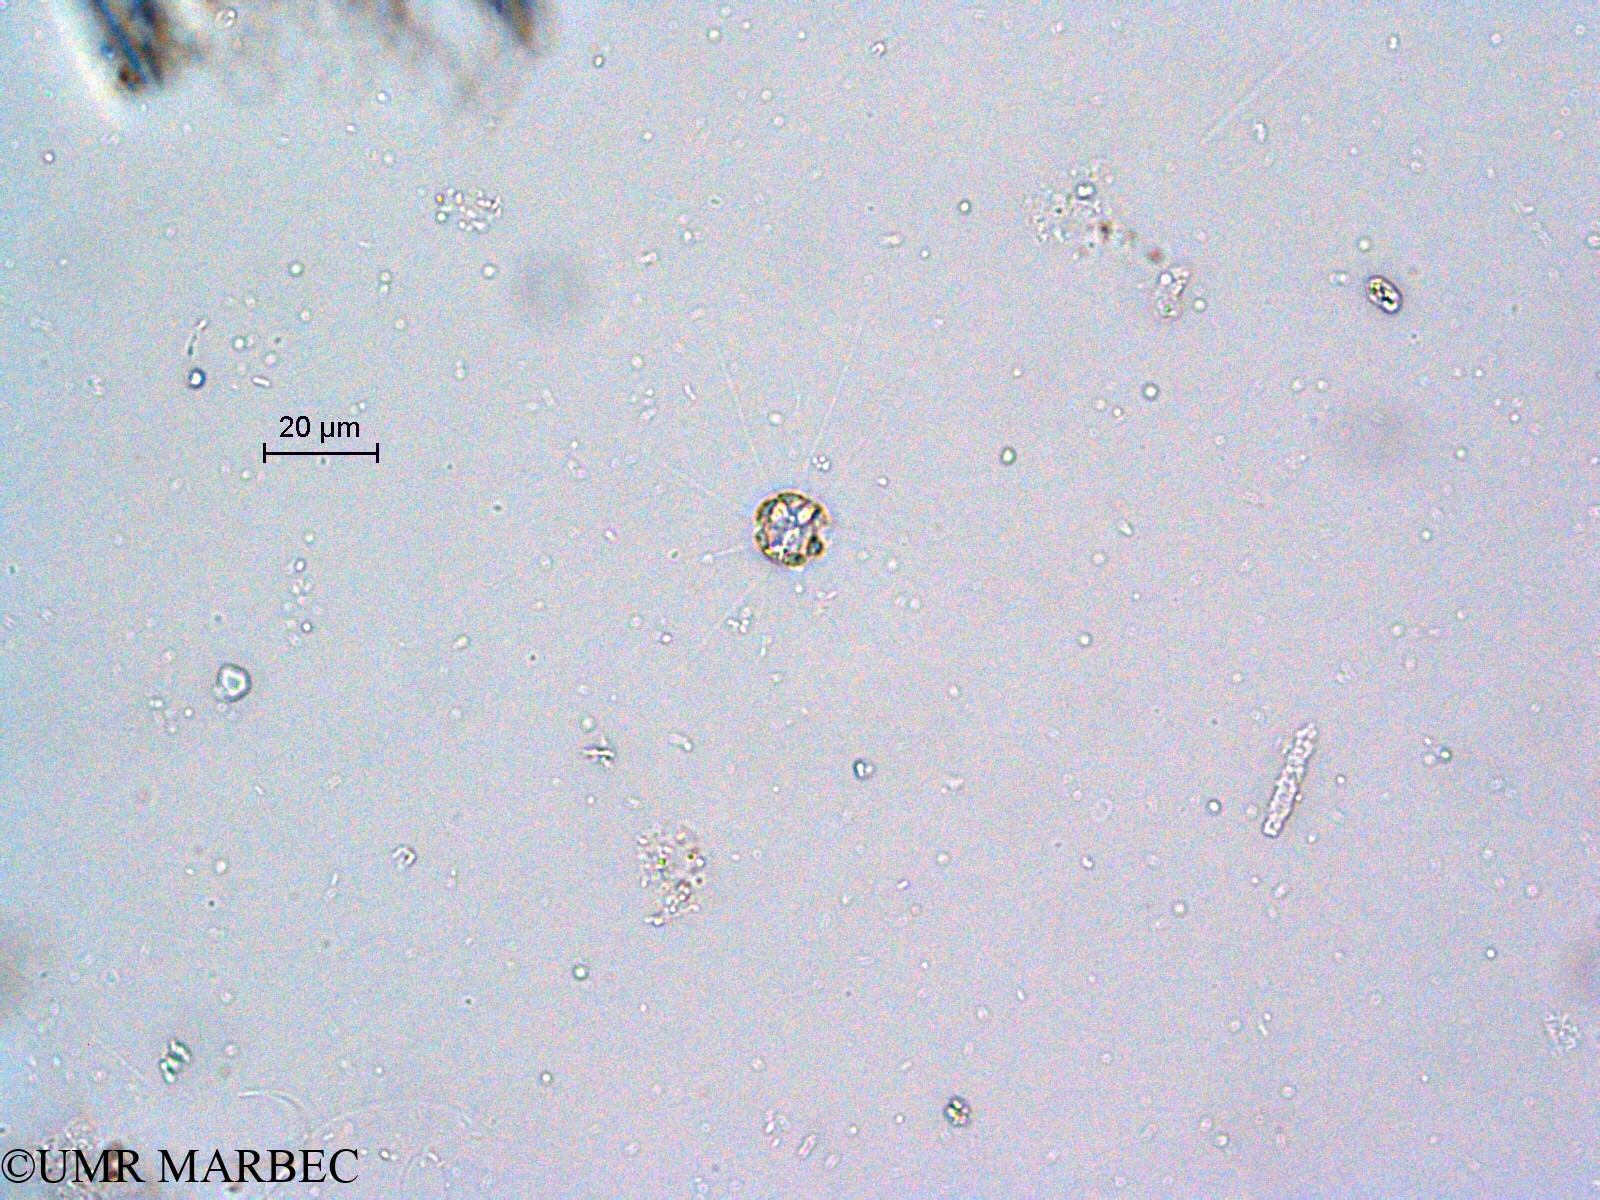 phyto/Scattered_Islands/all/COMMA April 2011/Bacteriastrum sp9 (3)(copy).jpg